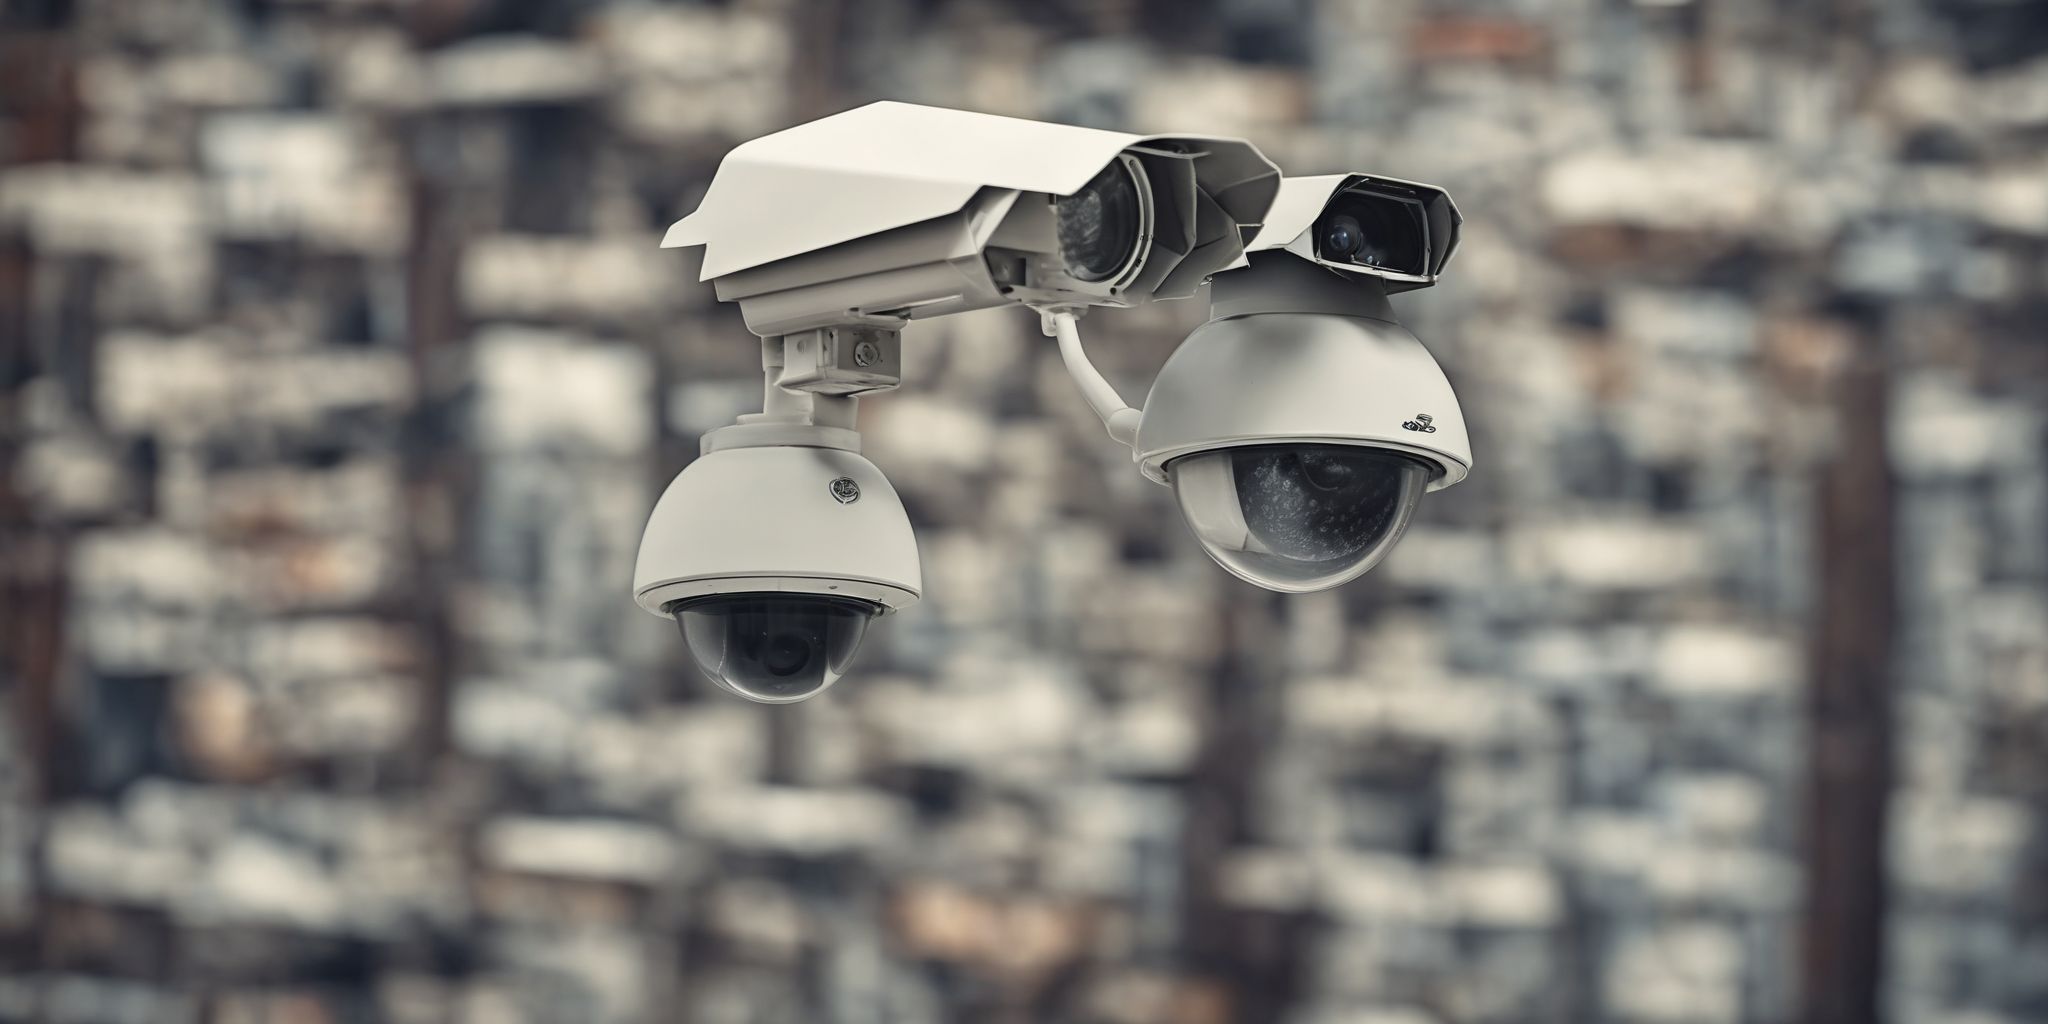 Surveillance  in realistic, photographic style